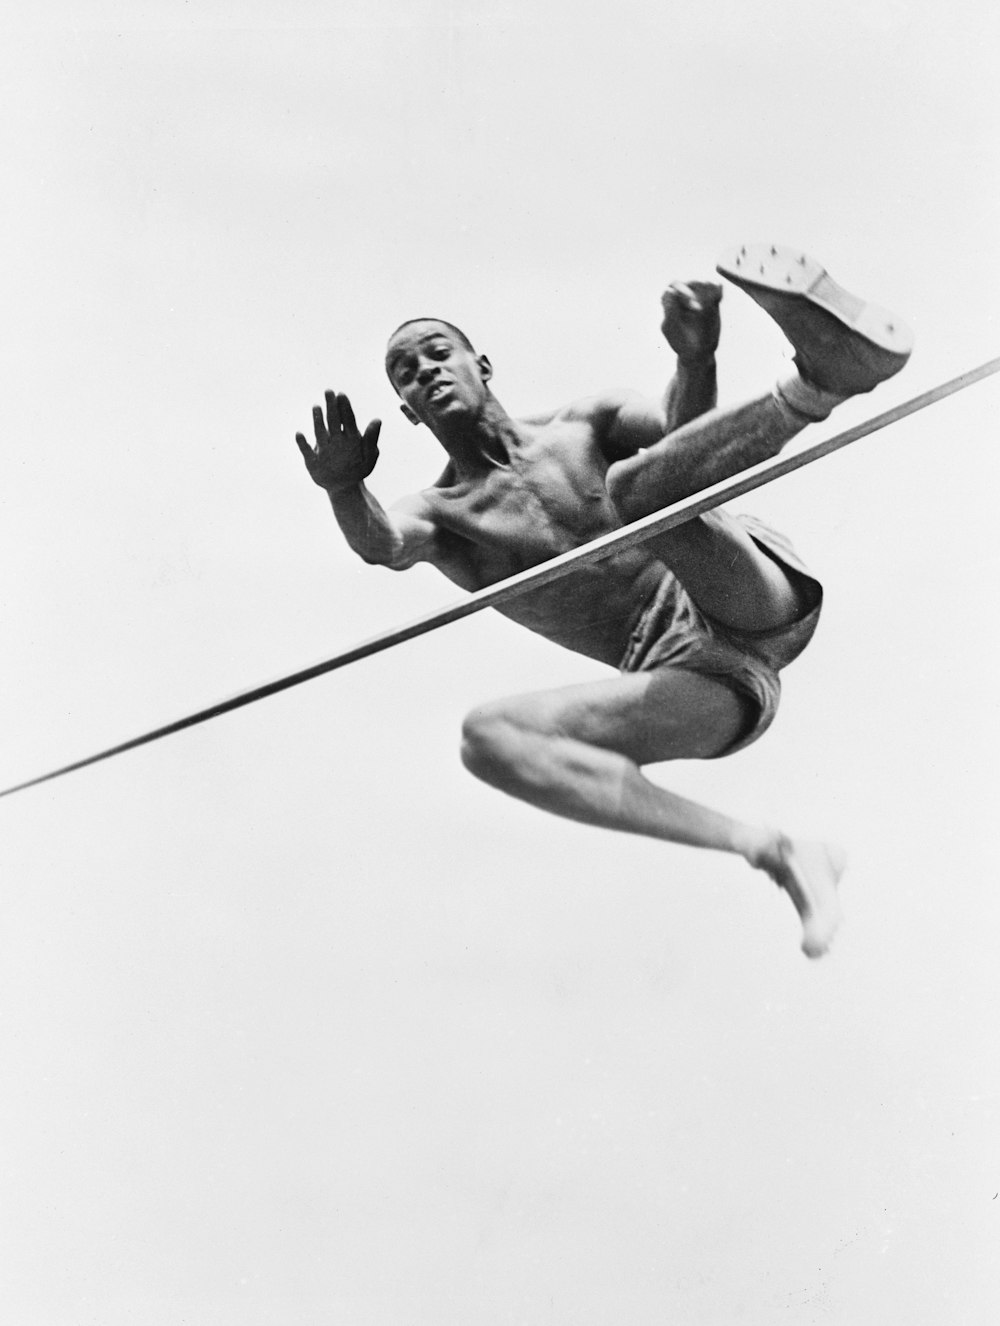 Cornelius Johnson, winner of the gold medal at the 1936 Olympics, in a high jump.